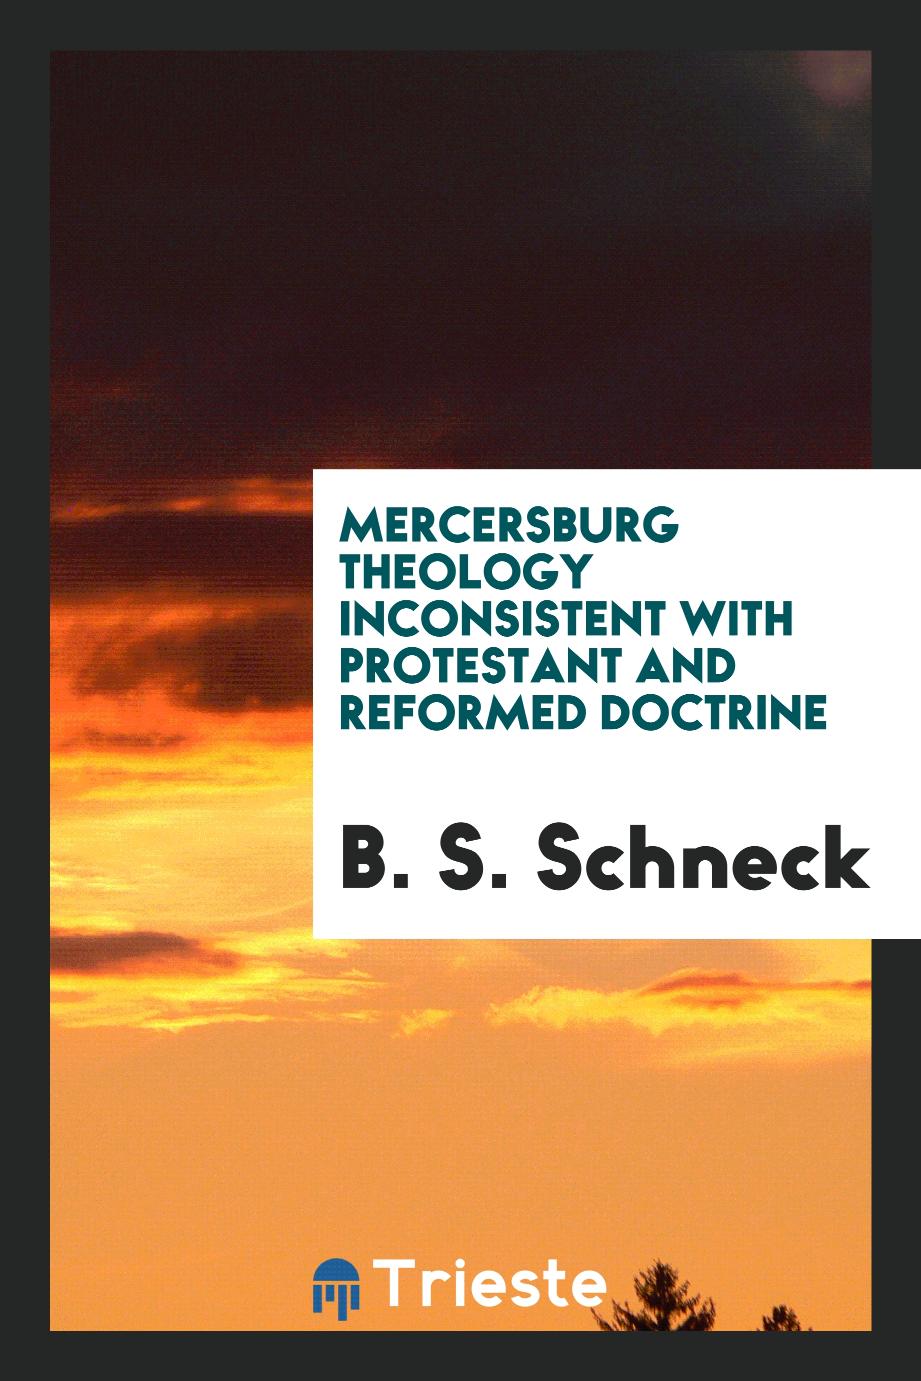 Mercersburg theology inconsistent with Protestant and Reformed doctrine